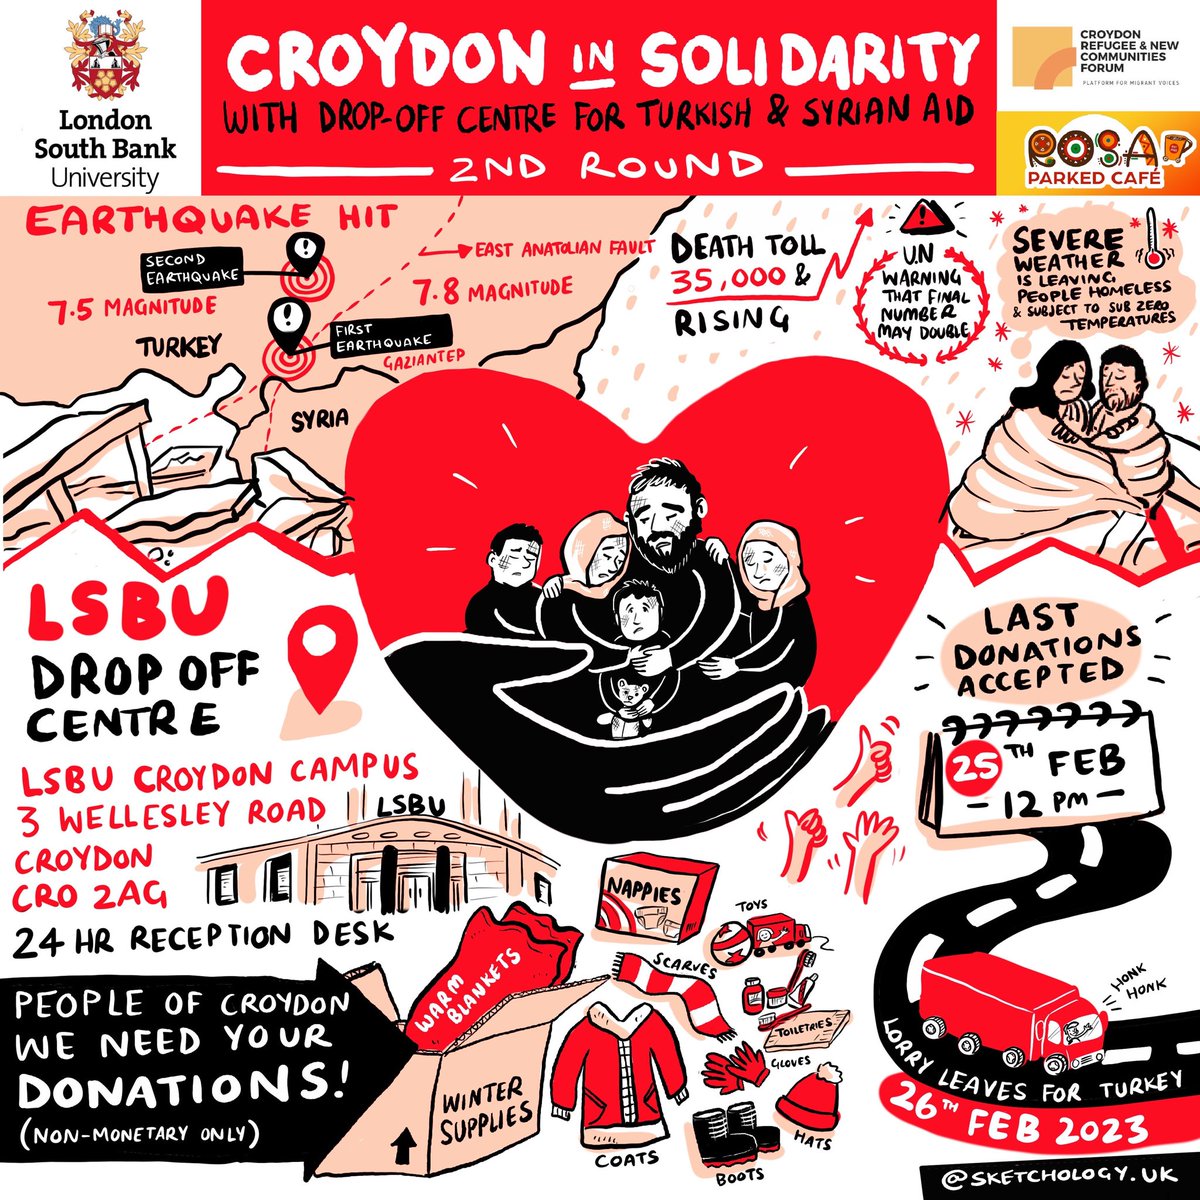 @CroydonNew are still collecting for the #TurkeySyriaAppeal Please share this appeal retweet to your followers and donate or help in any way you can please. @InsideCroydon @yourcroydon @CroydonBID @BLBroadGreen @RAMFELCharity @migrants_rights @SyriaCivilDef @Turkey_Pics